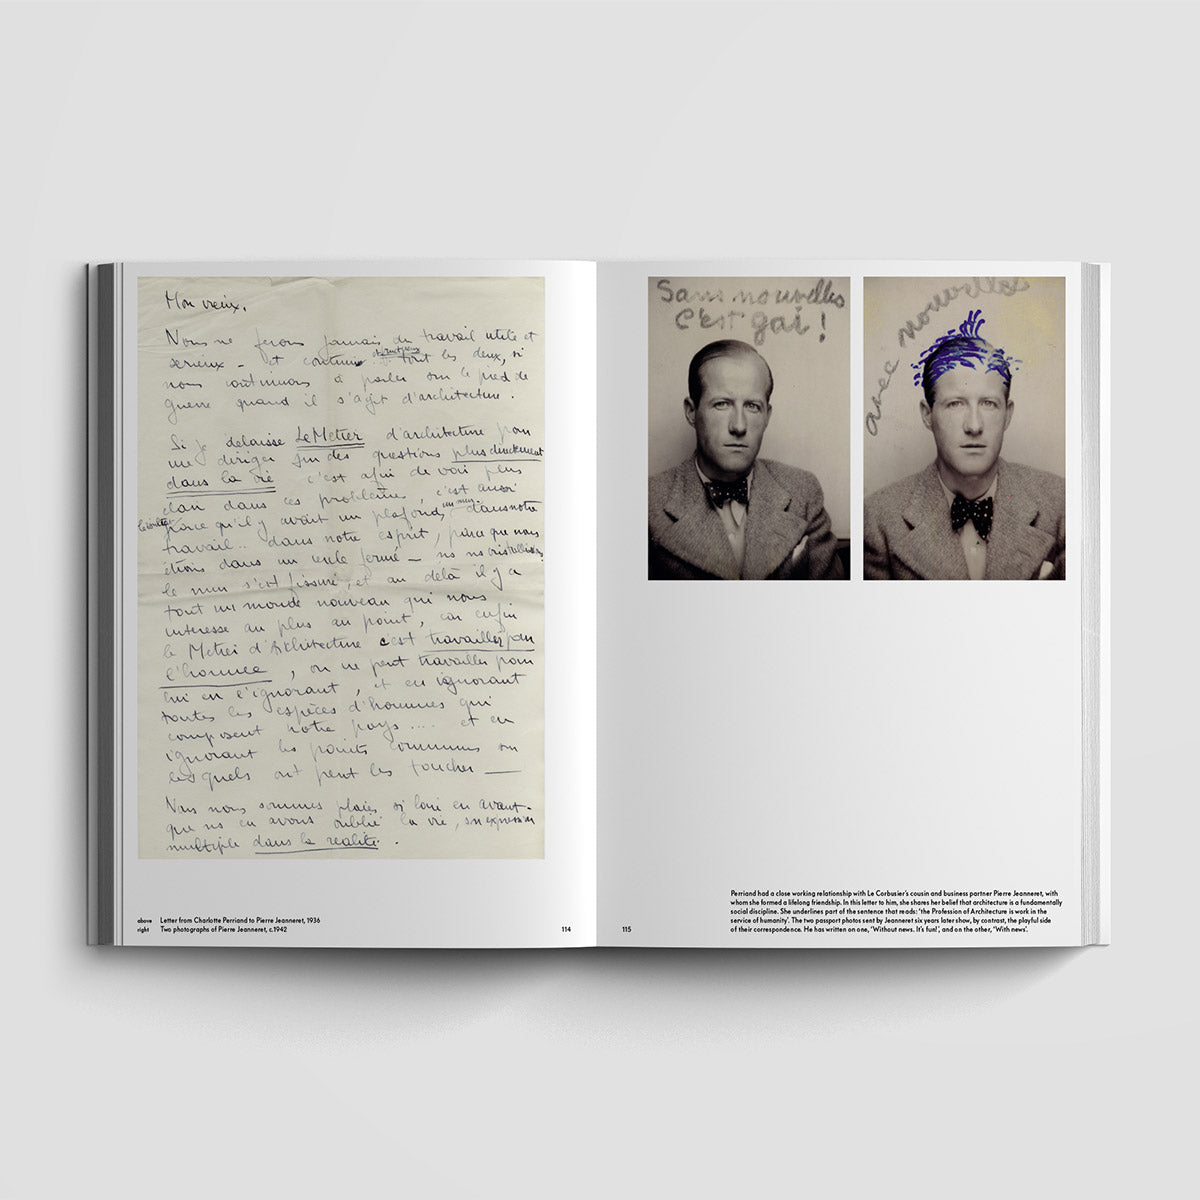 Charlotte Perriand: The Modern Life Exhibition Catalogue